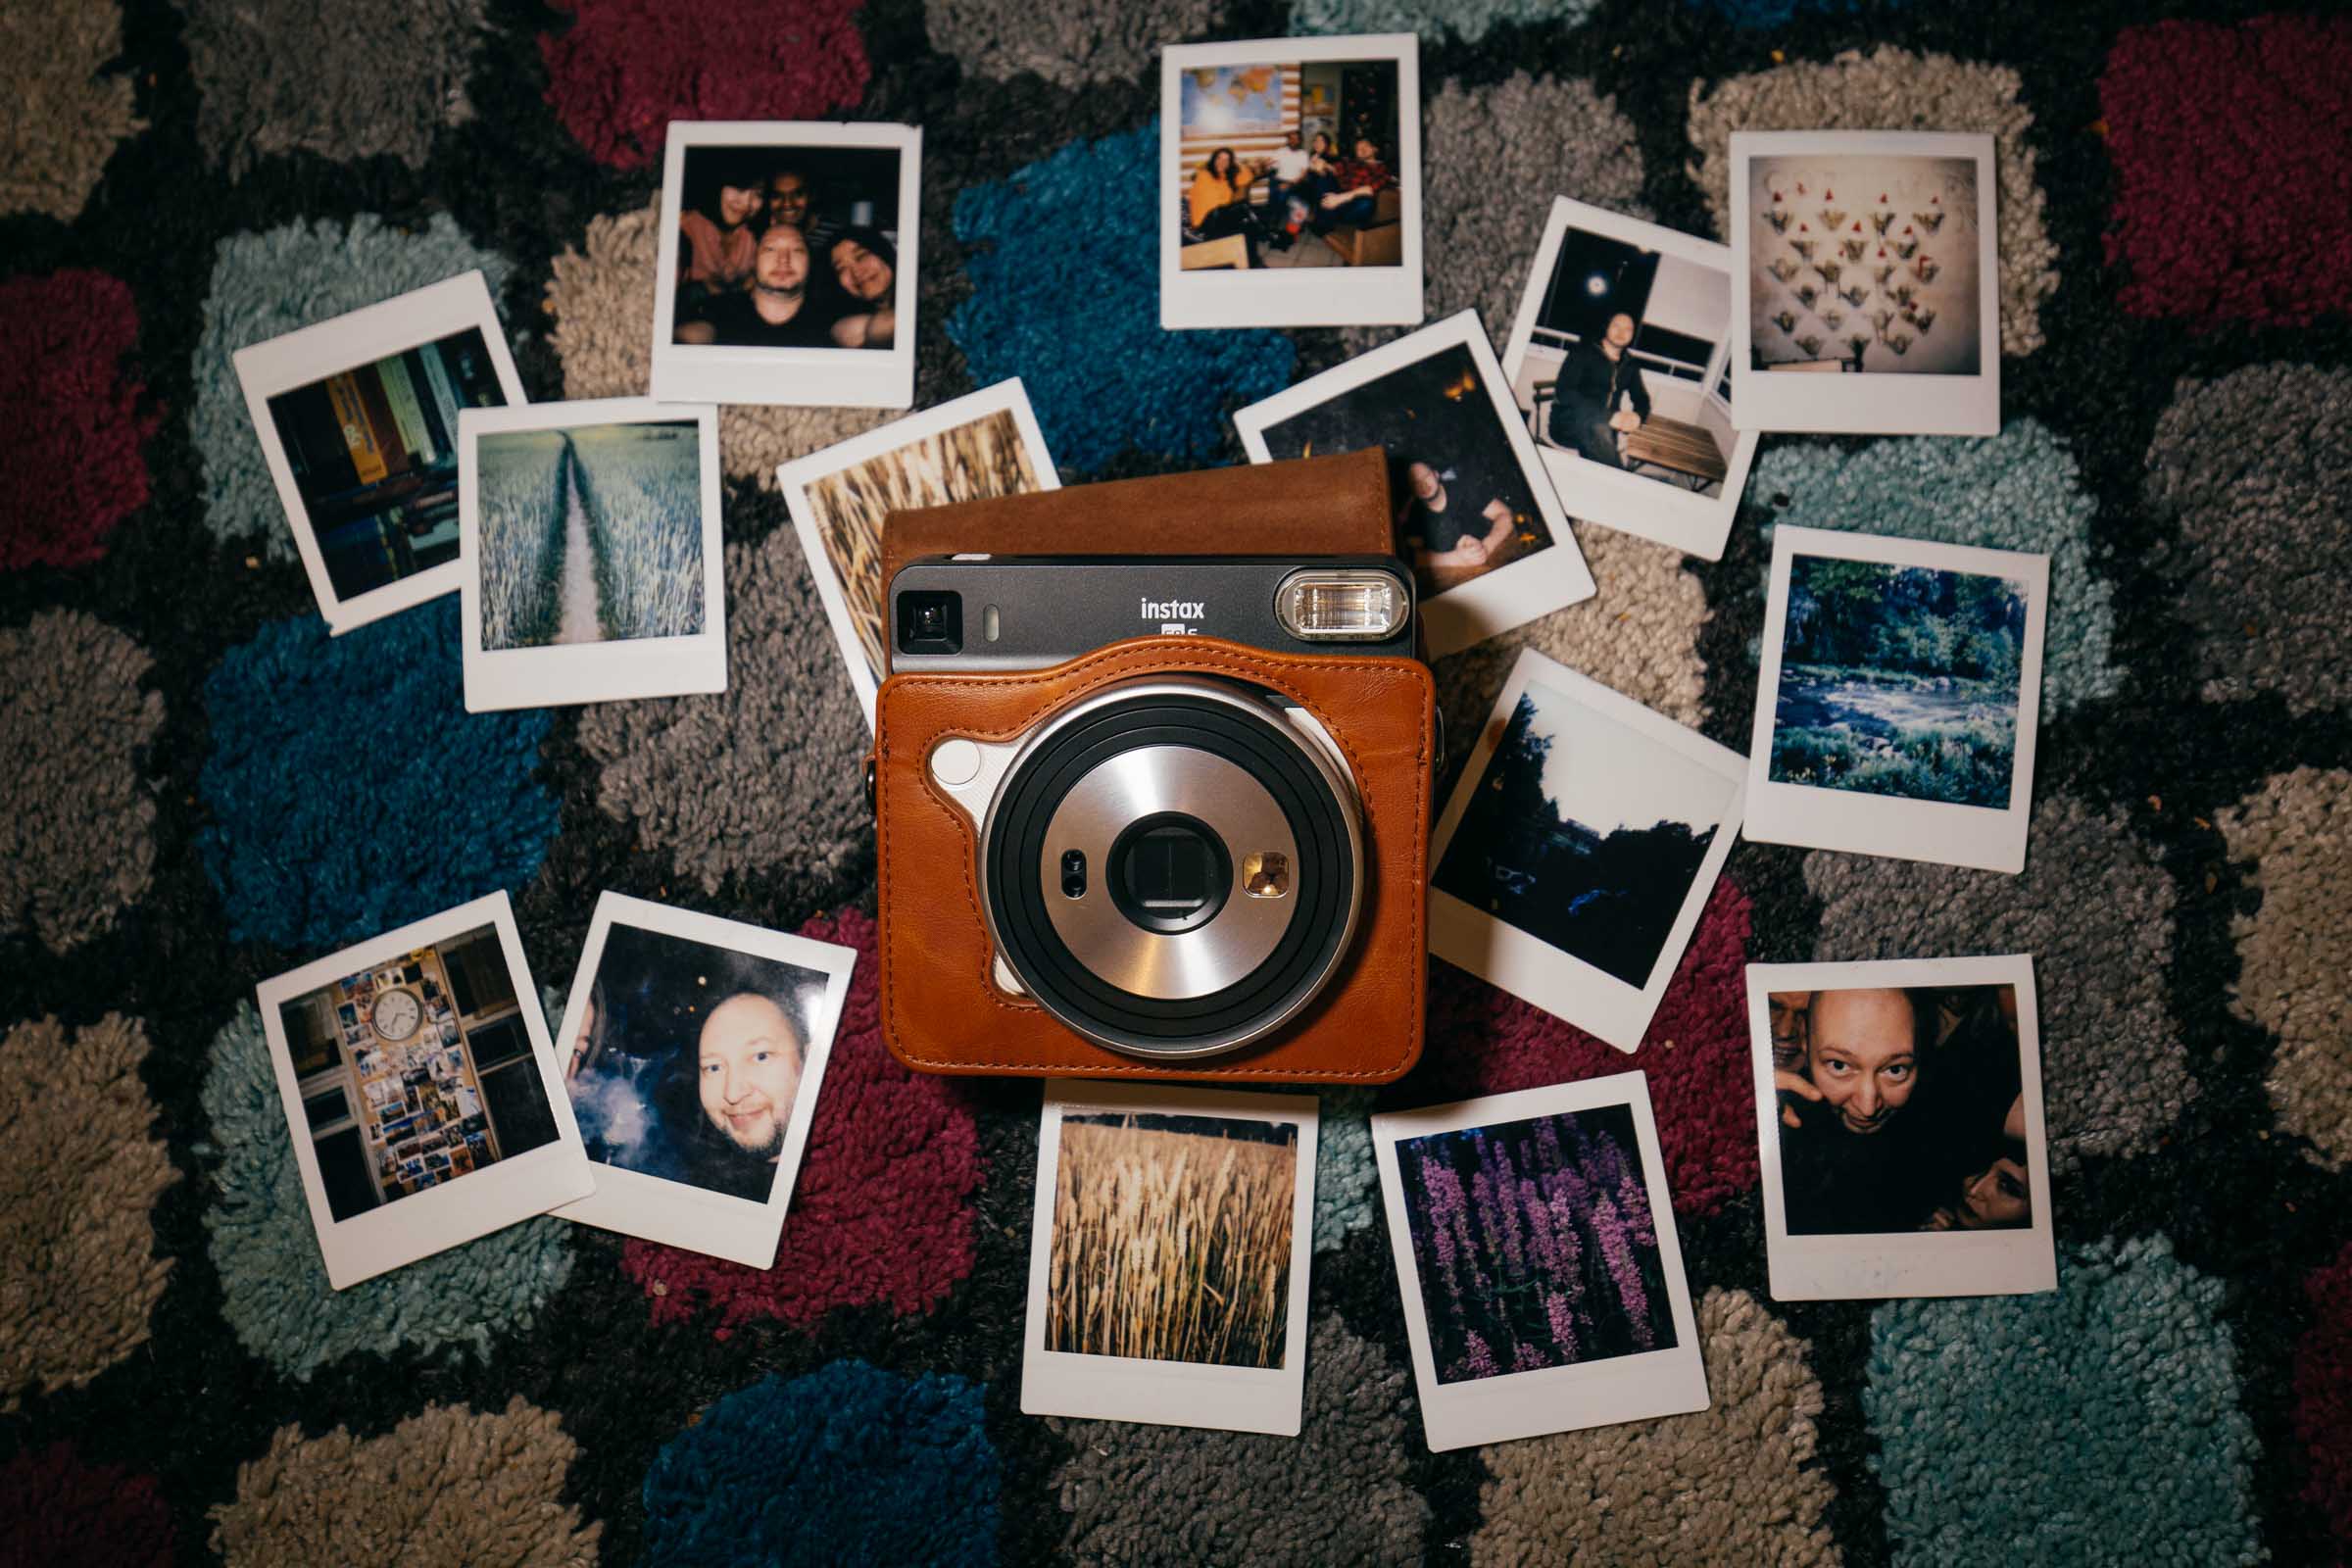 Draai vast Schurend Dicteren Fujifilm Instax SQ6 Review, best instant camera for travel? – Finland based  travel photographer – Blog About Best Places to Visit in Europe |  Engineerontour